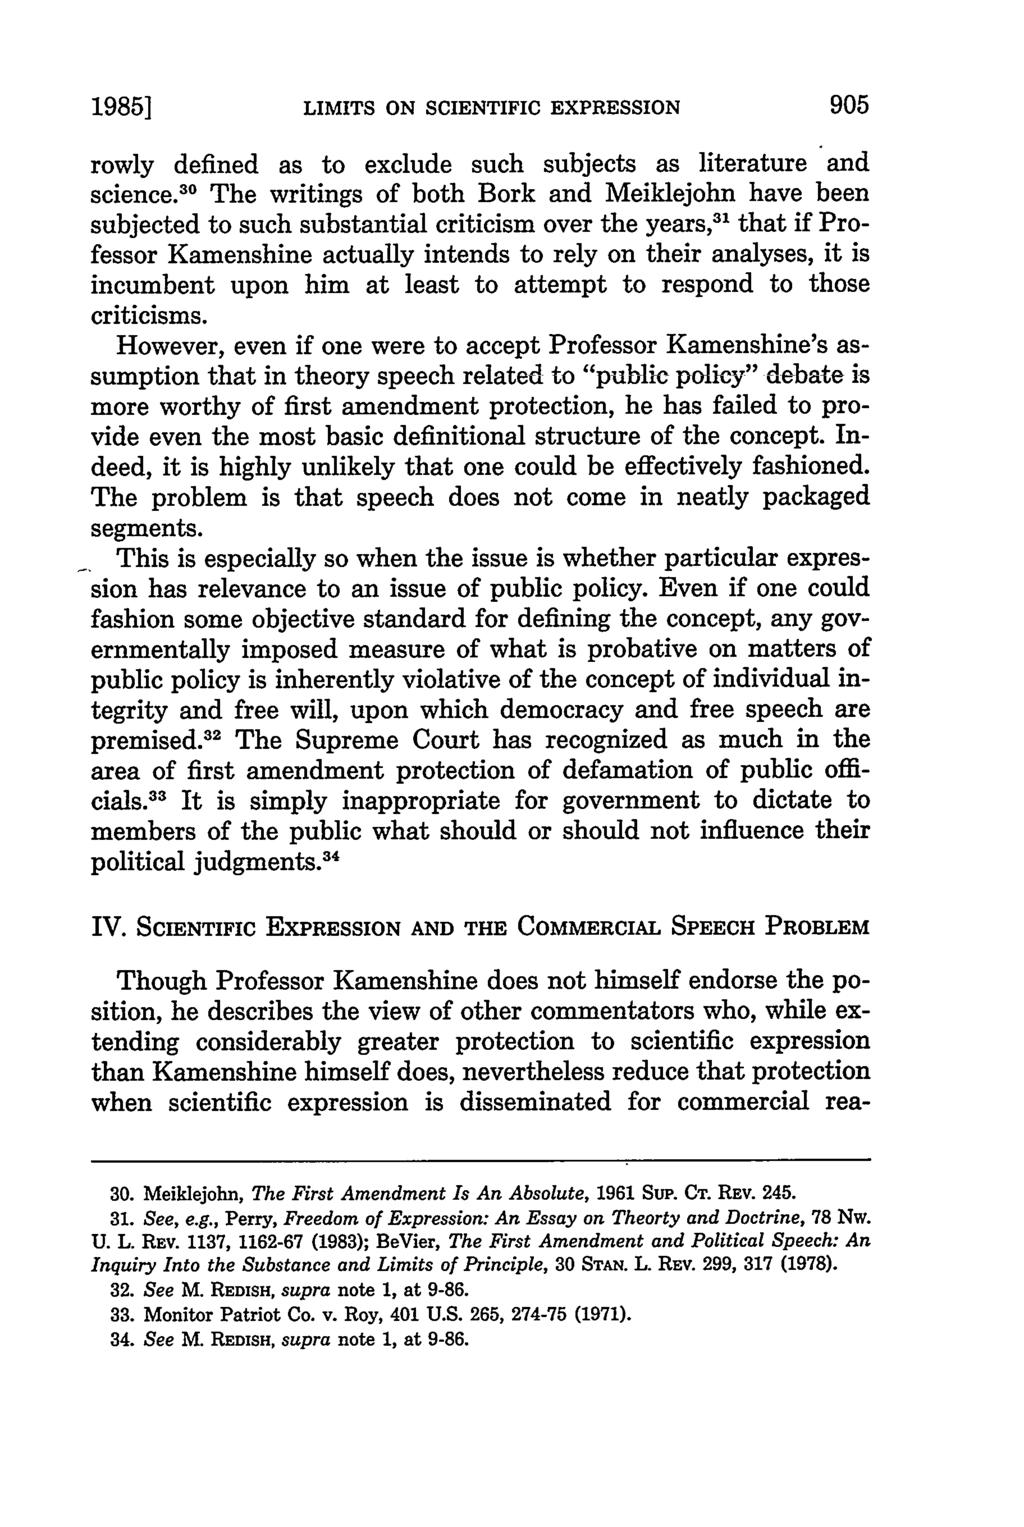 1985] LIMITS ON SCIENTIFIC EXPRESSION rowly defined as to exclude such subjects as literature and science.